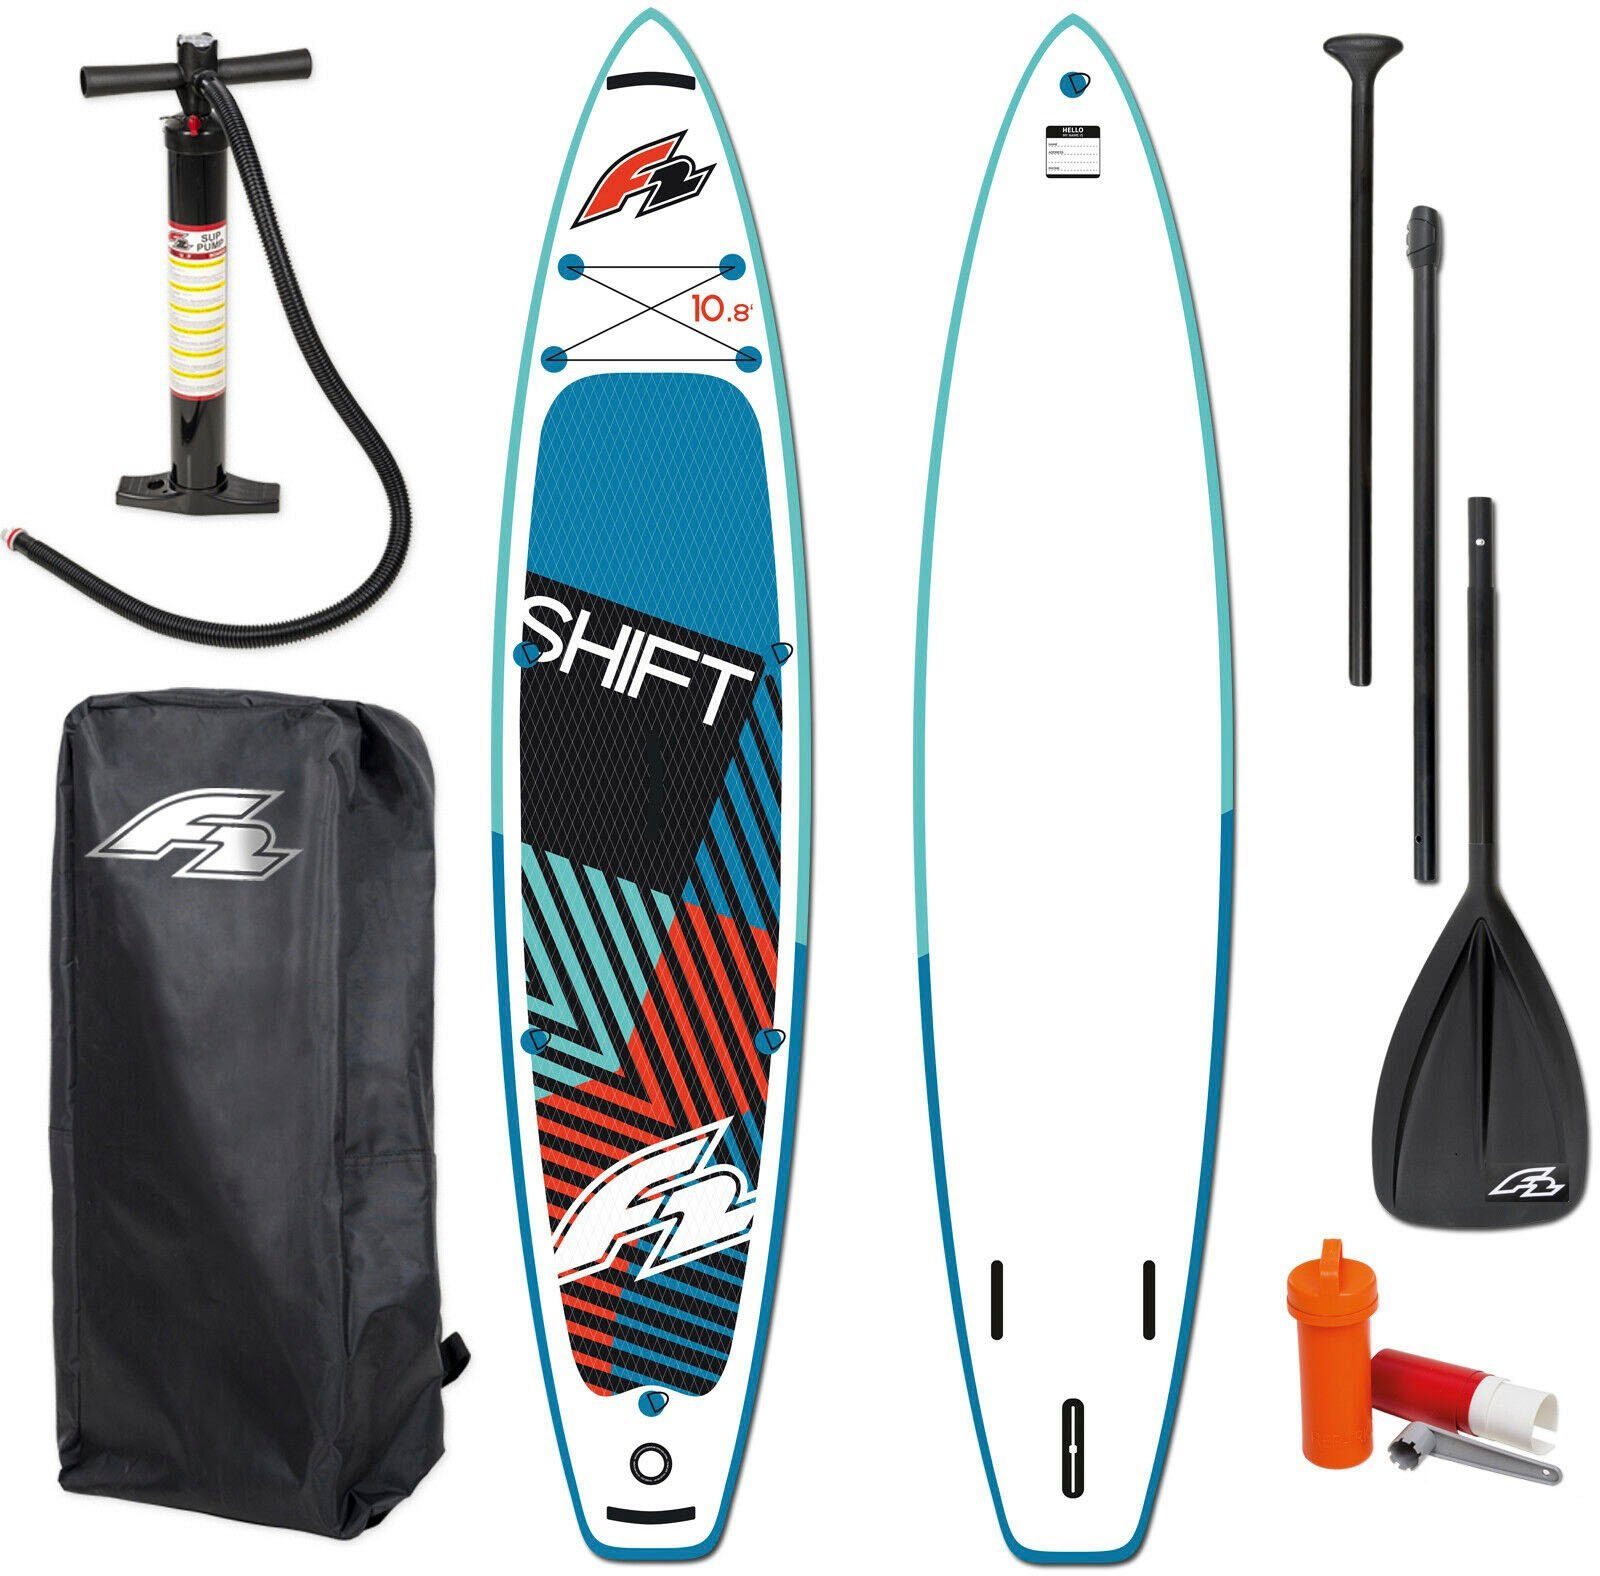 F2 Inflatable SUP-Board Shift 10,8, (Packung, 5 tlg)